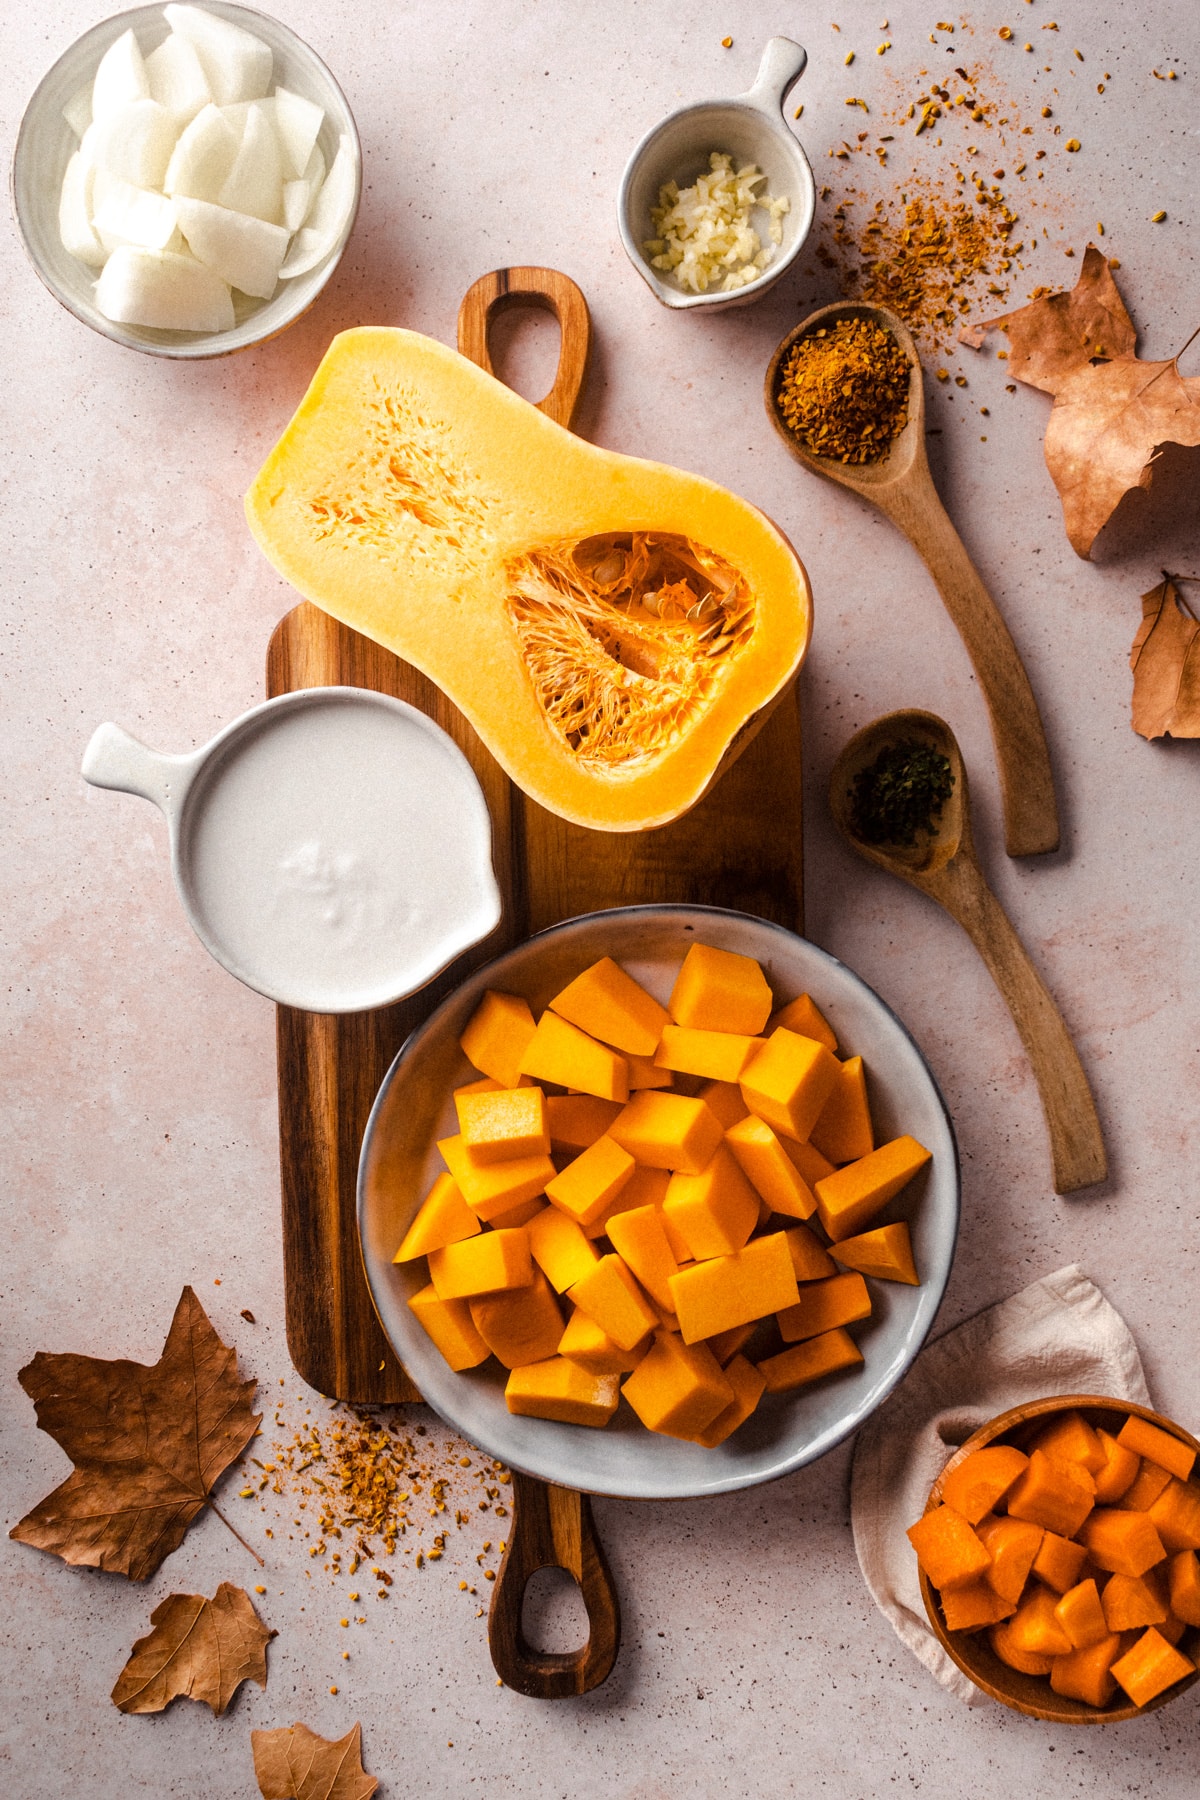 Ingredients for butternut squash soup with coconut milk.